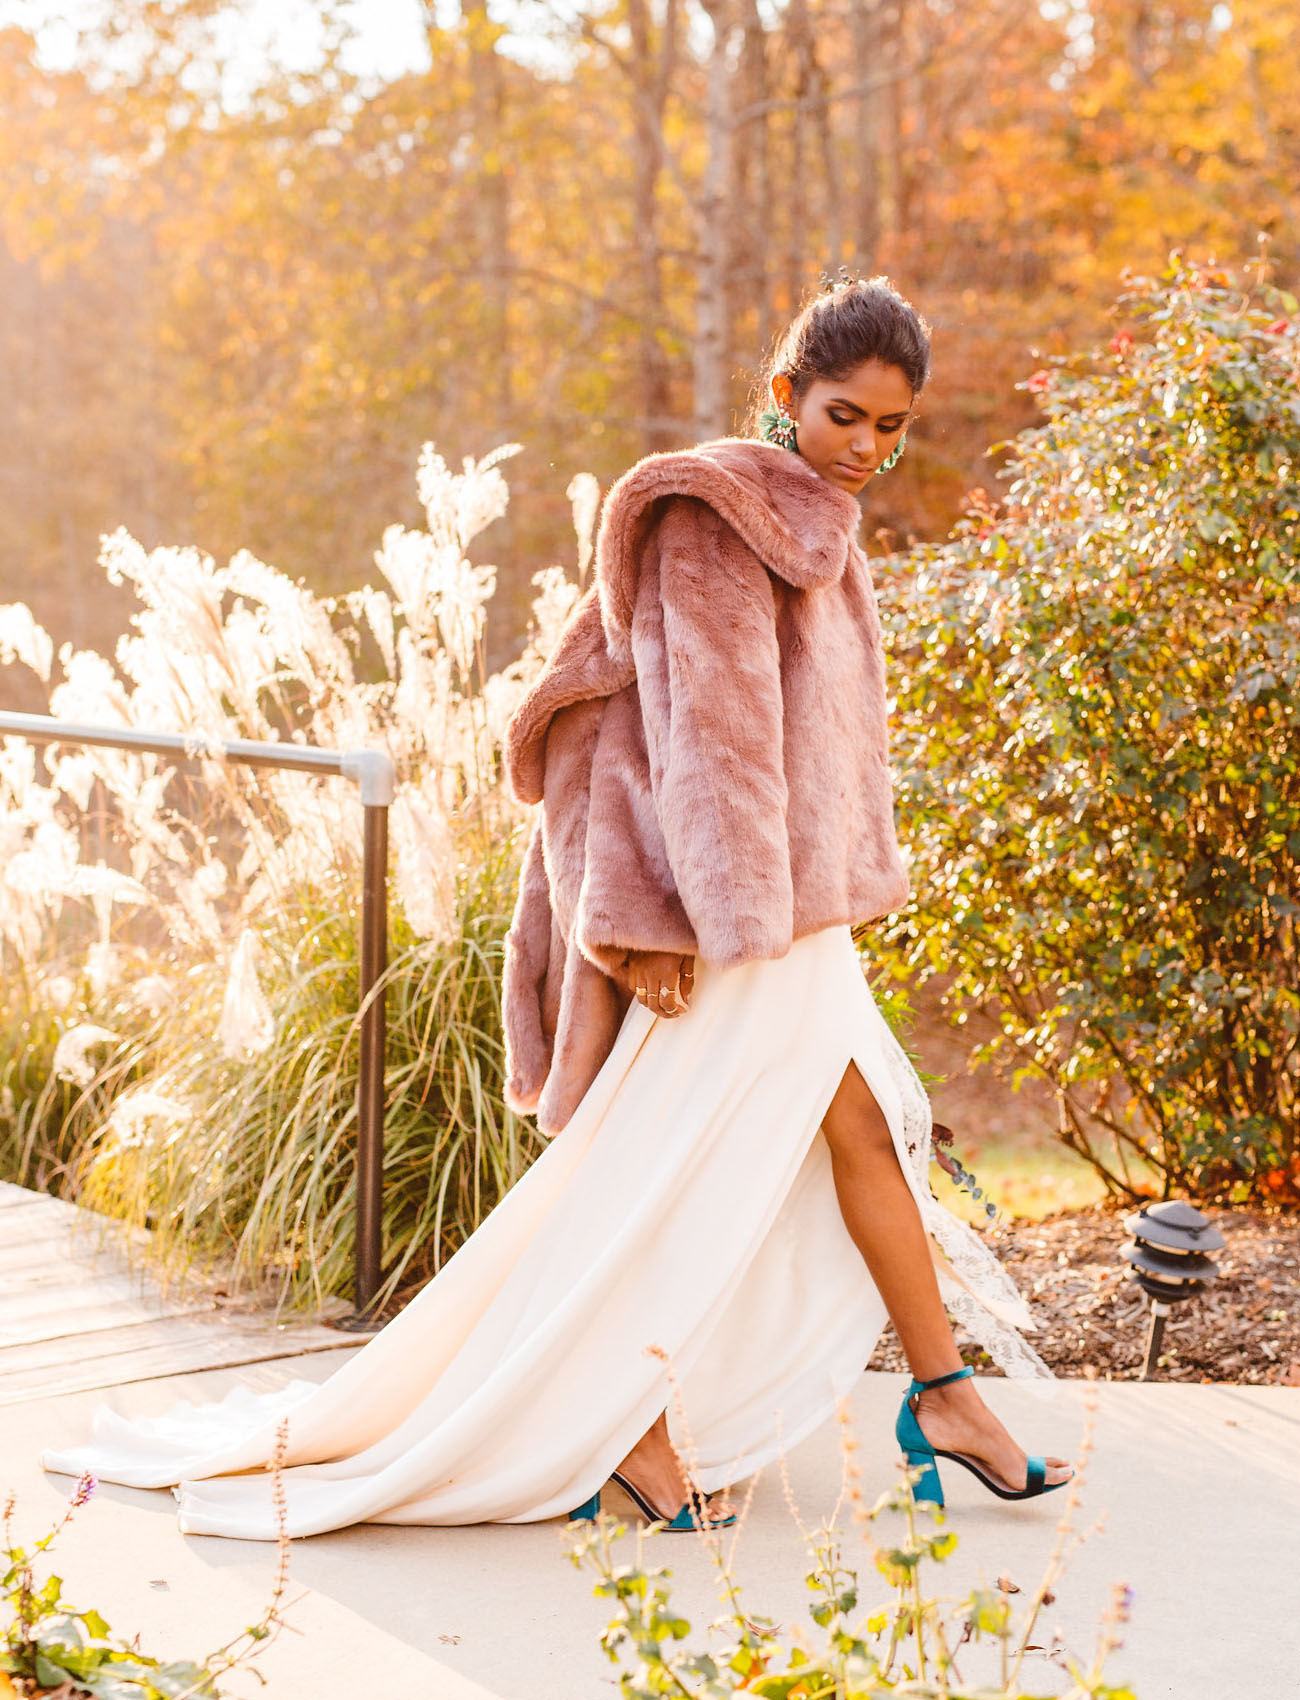 The bride covered up with a mauve faux fur jacket to feel warm